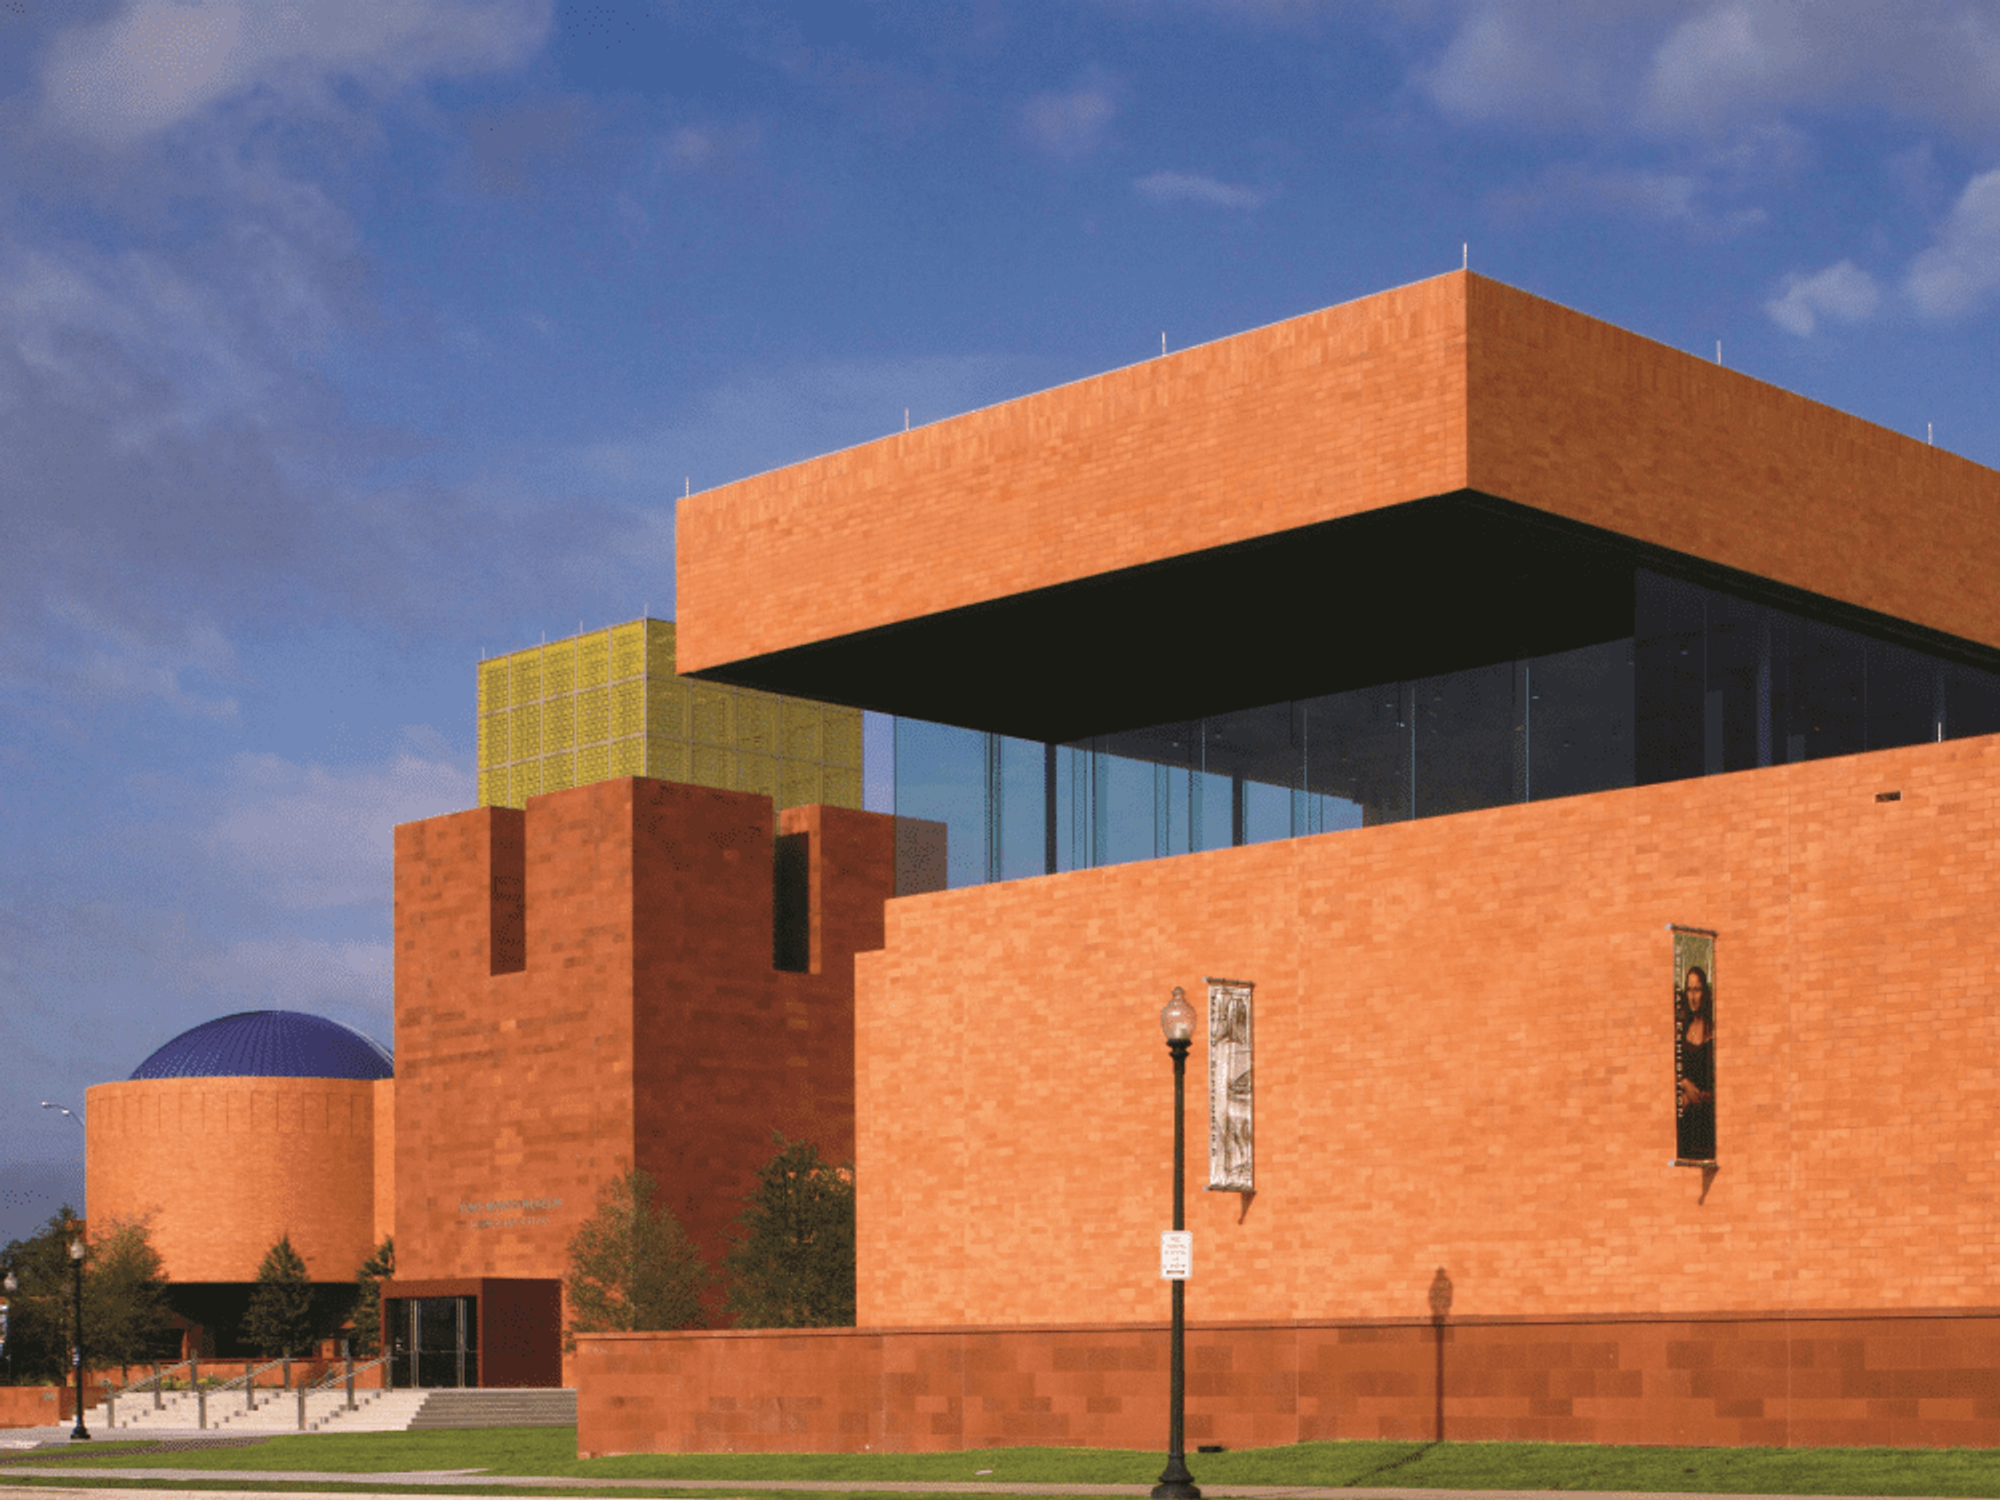 The Fort Worth Museum of Science and History will reopen for members on July 9 and on July 14 for the general public.